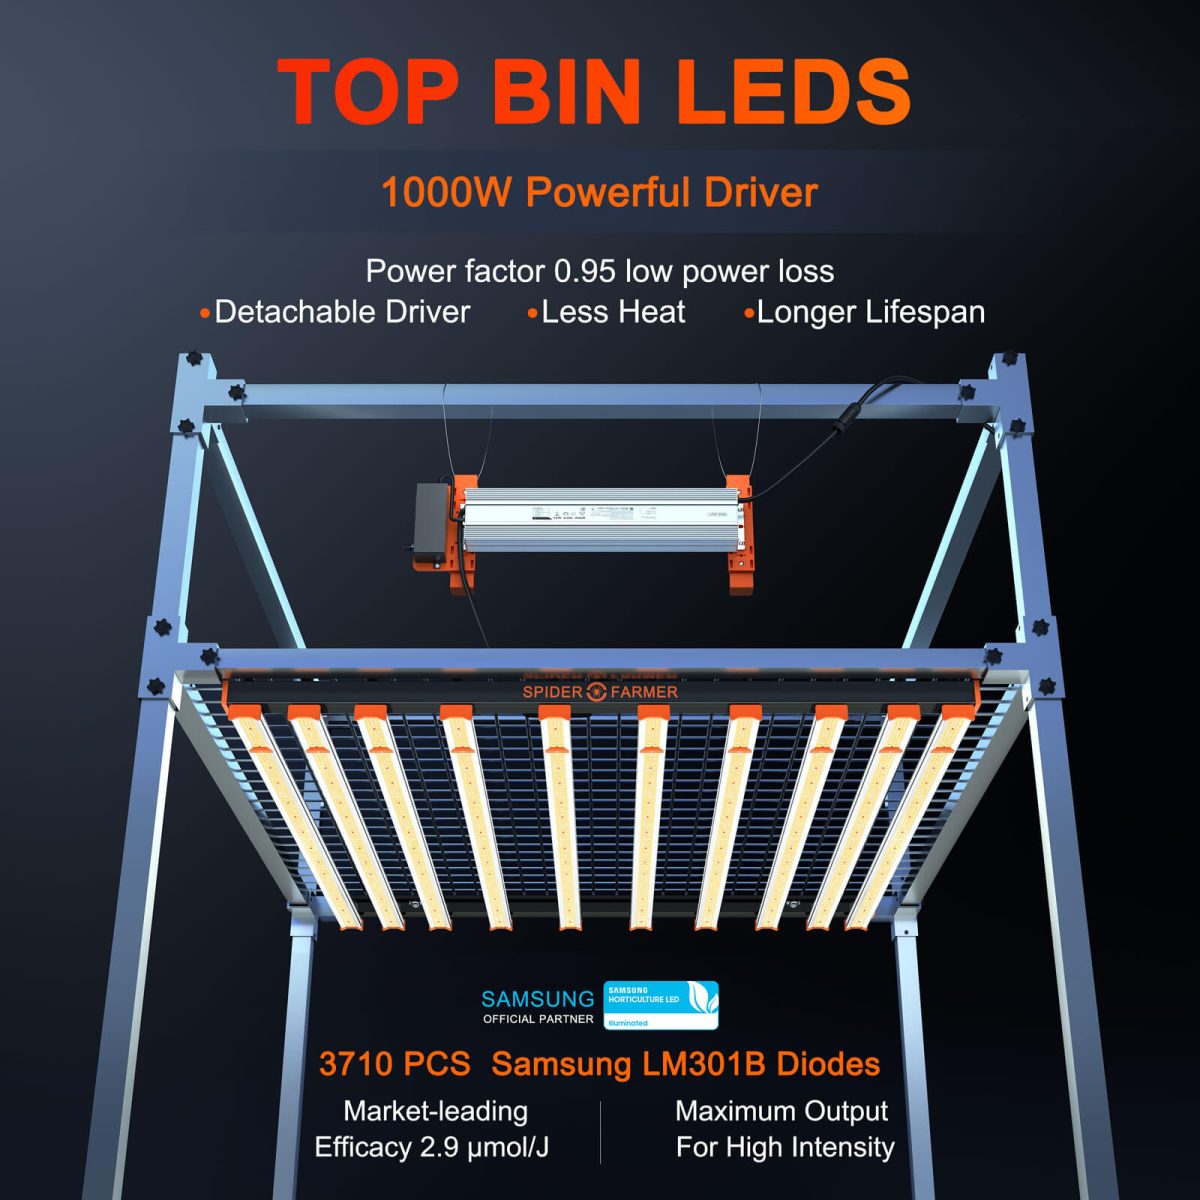 Features of SE1000W LED